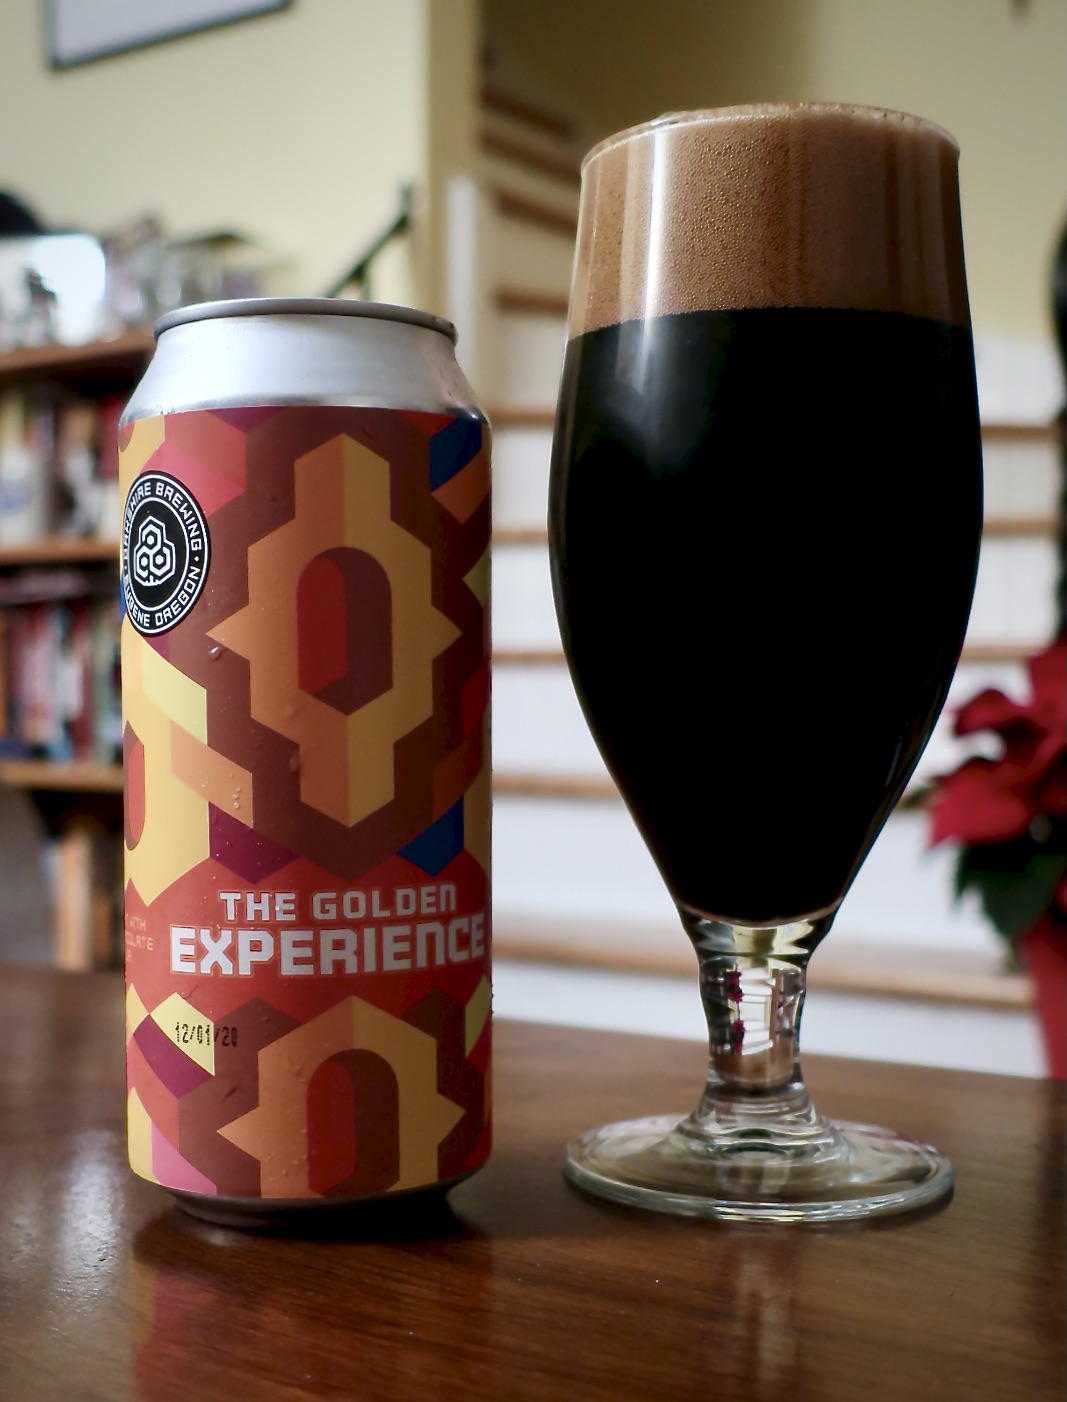 Oakshire Brewing releases its latest beer from its Pilot Program - The Golden Experience.